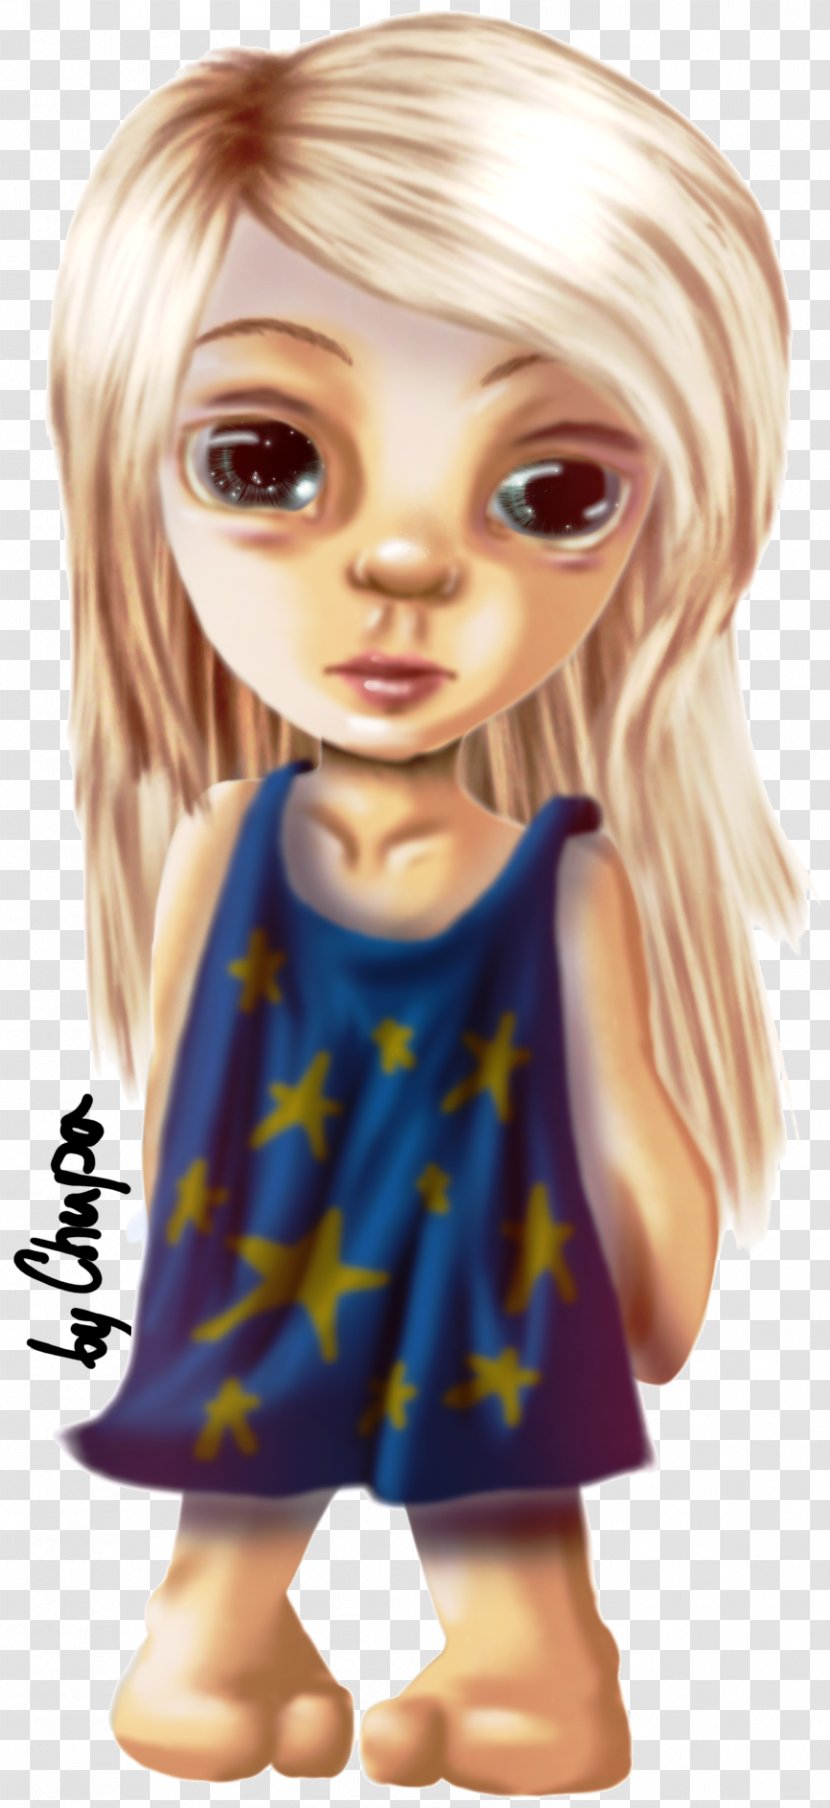 Blond Brown Hair Doll Character - Watercolor Transparent PNG